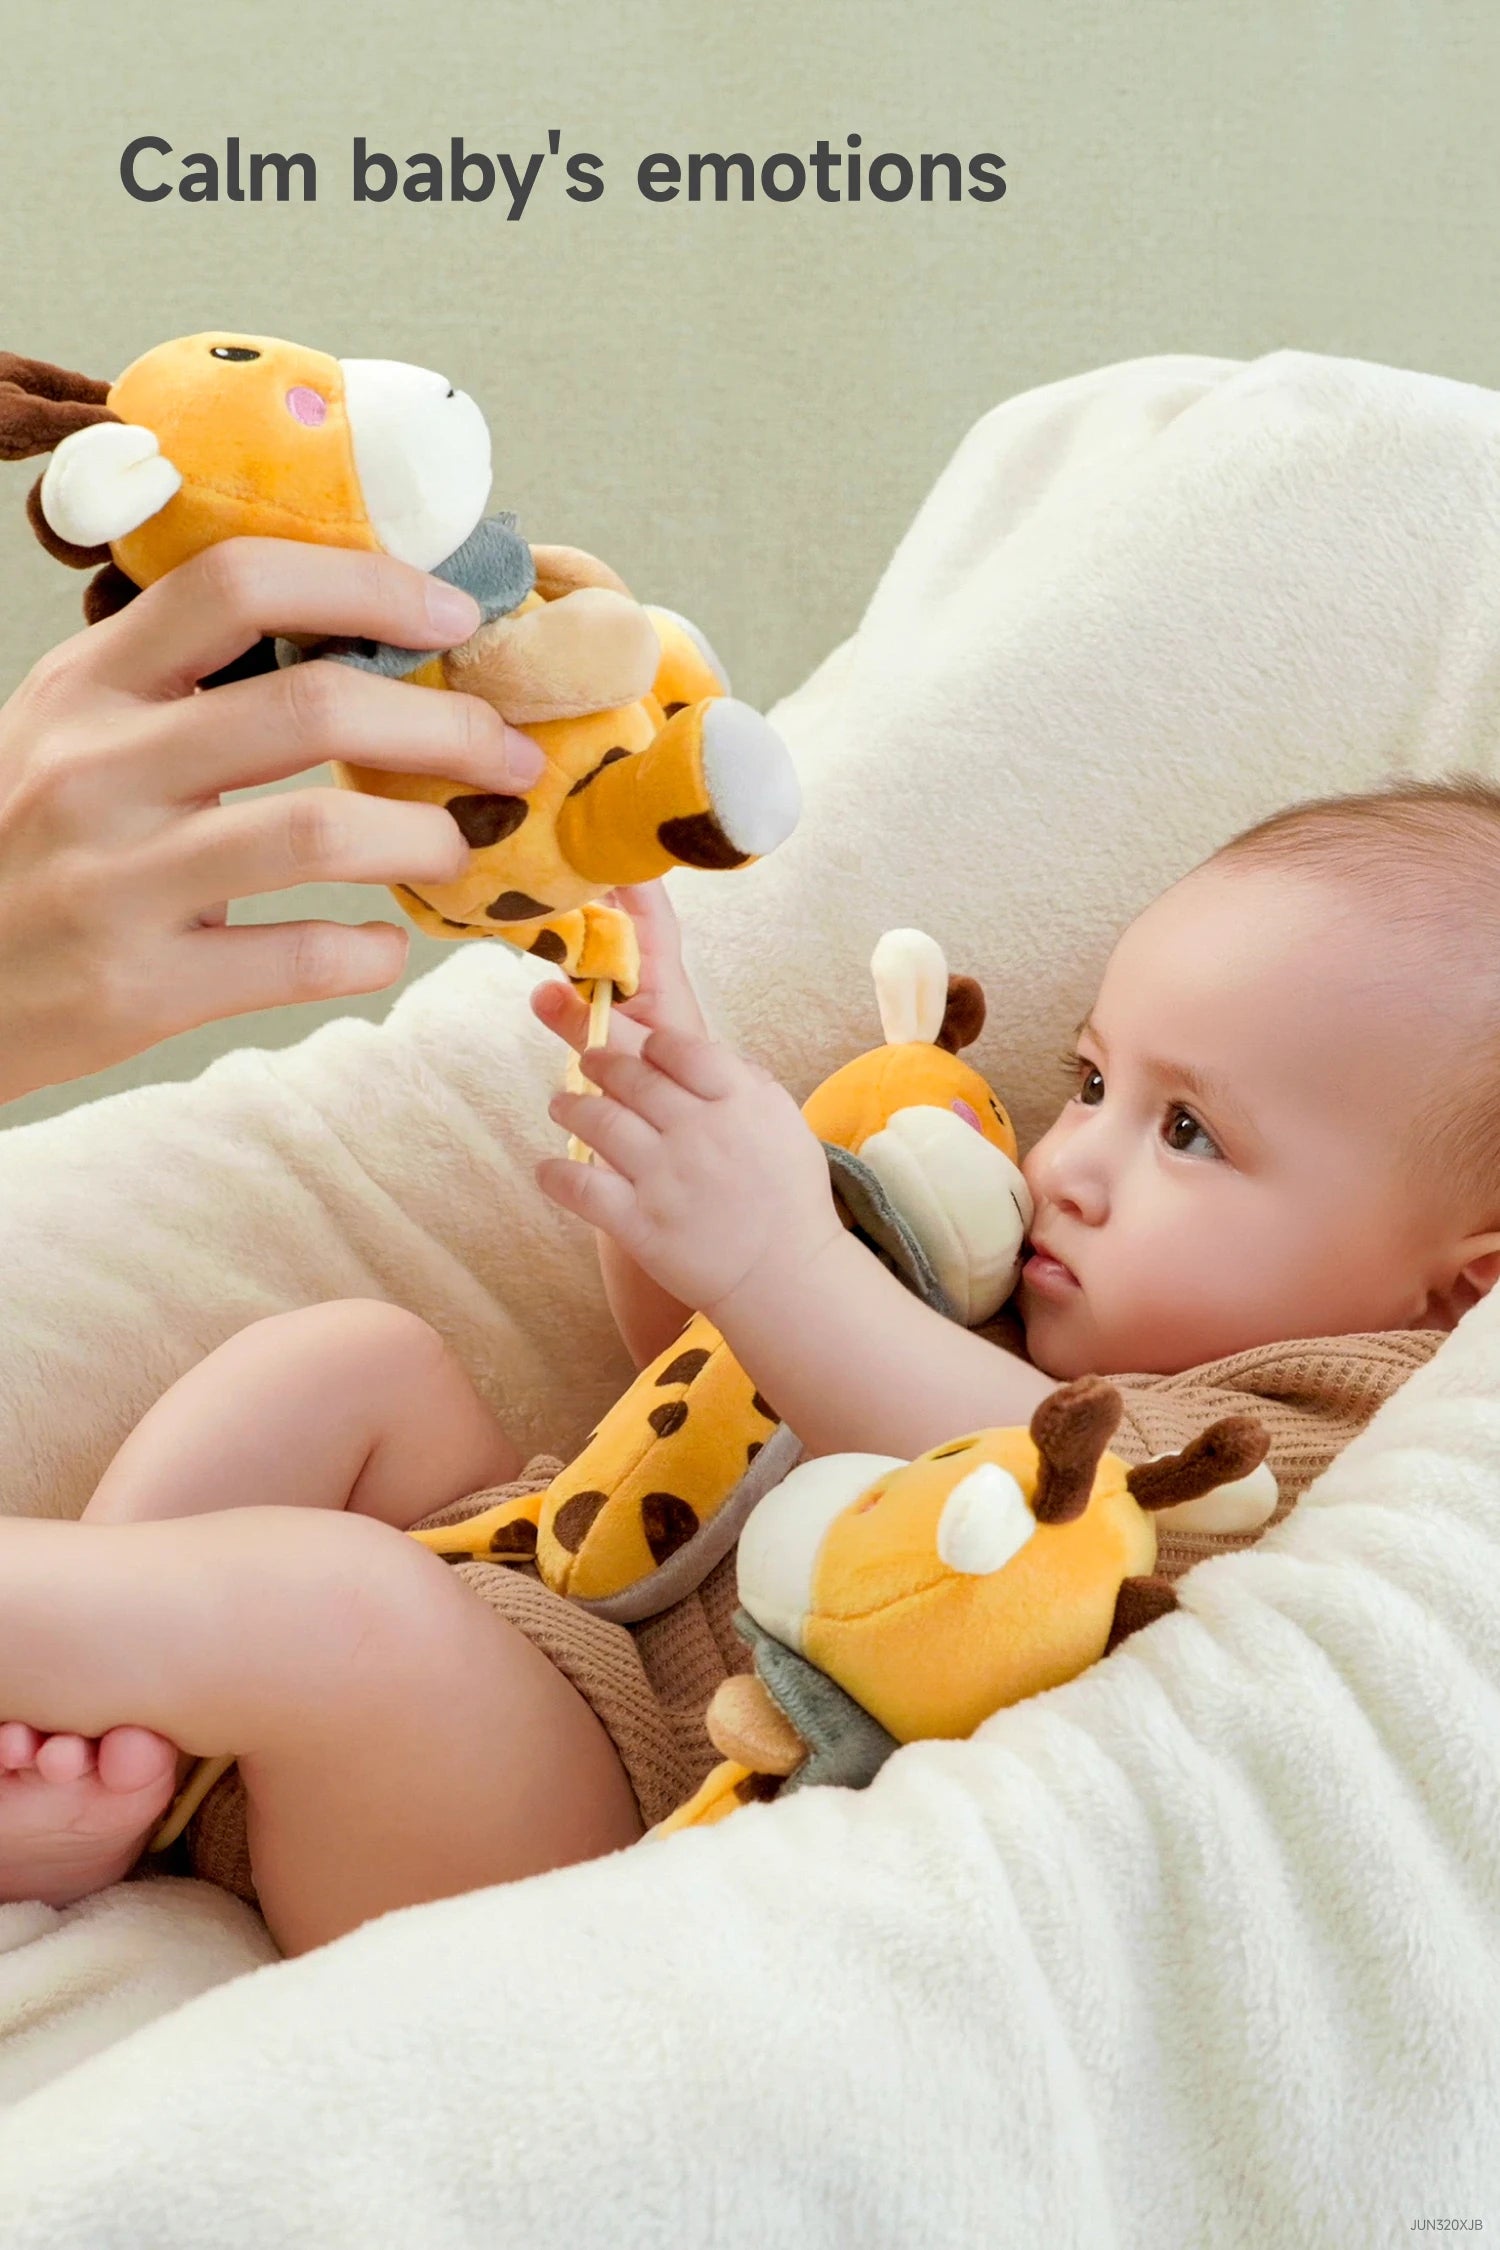 Infant_s 0 Month_ plush set featuring giraffe rattle toys